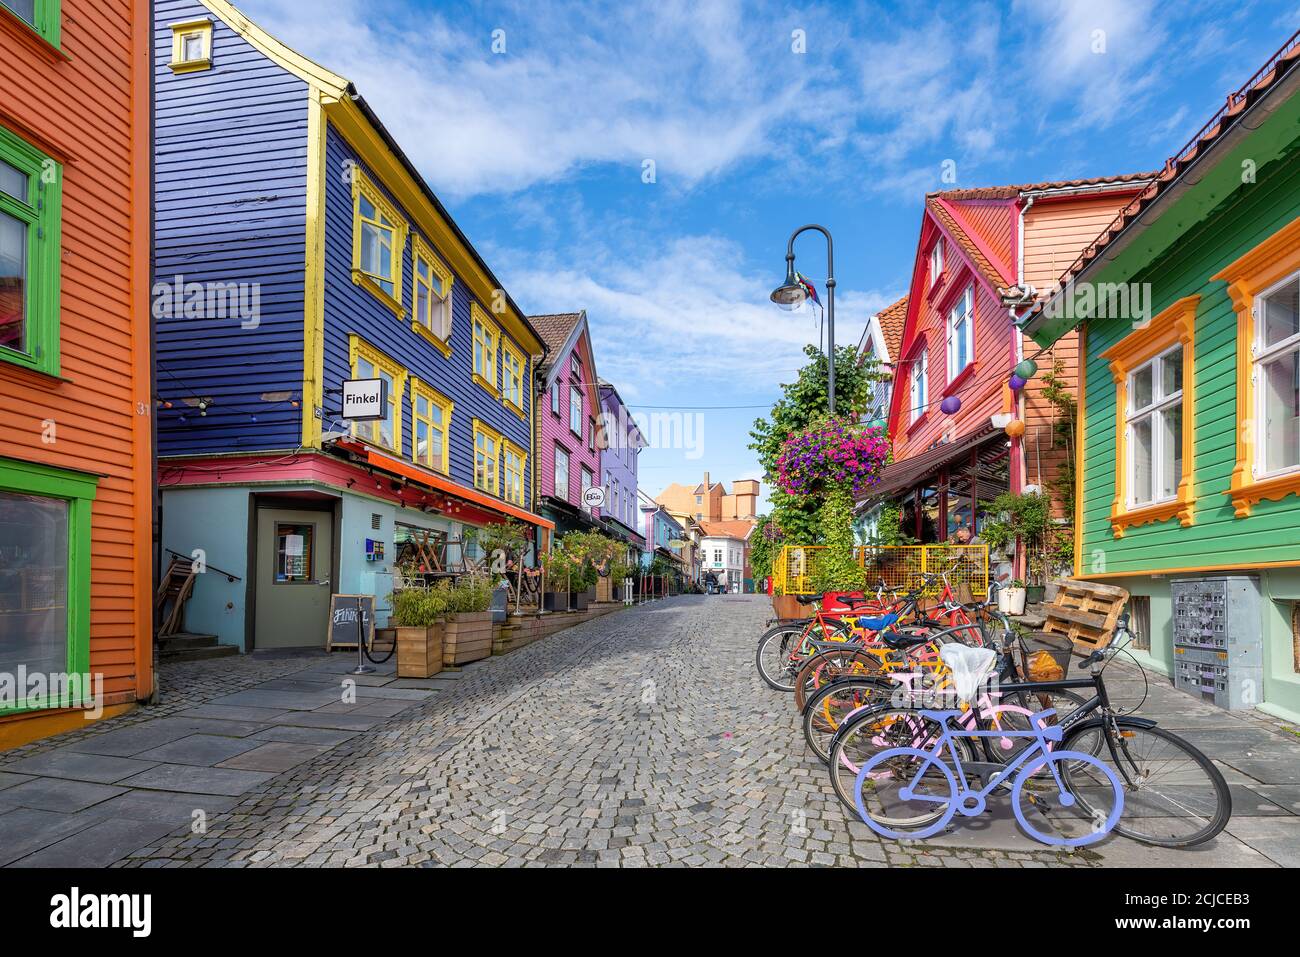 Stavanger, Norway - View of the old town streets, people and restaurants in Stavanger, Norway. Stavanger is one of most famous cruise t Stock Photo